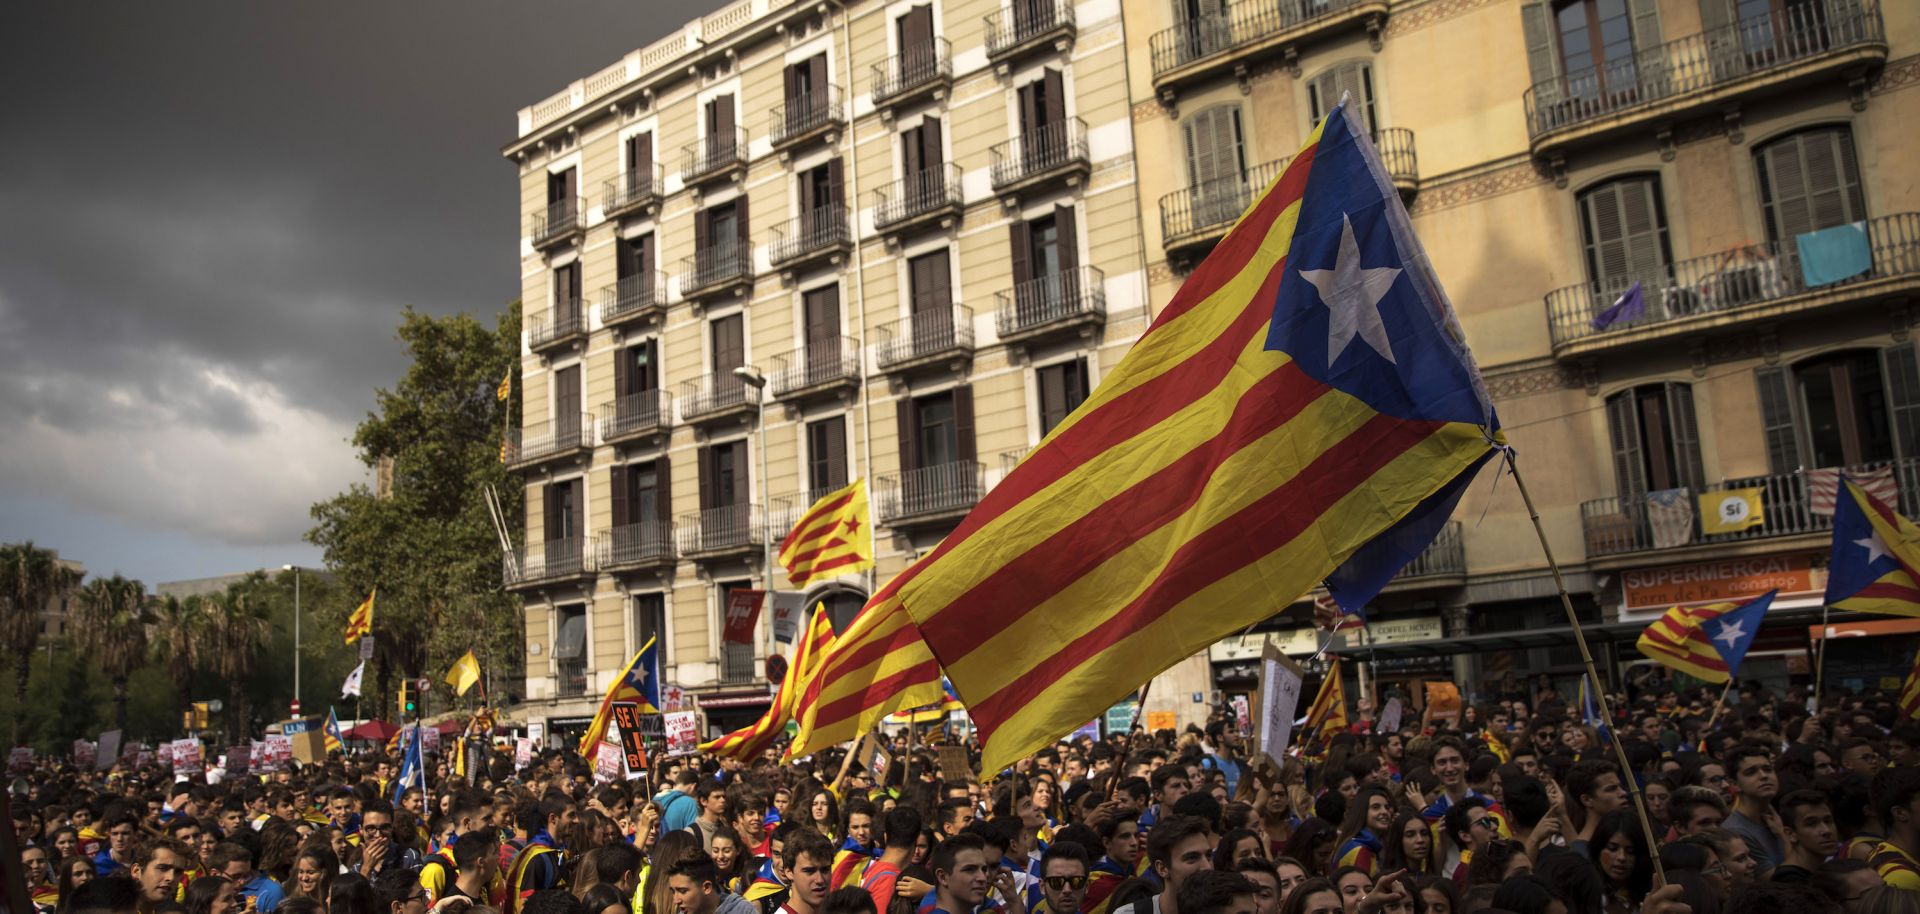 Students demonstrate against the Spanish government's decision to ban the Catalan referendum on Sept. 28 in Barcelona.